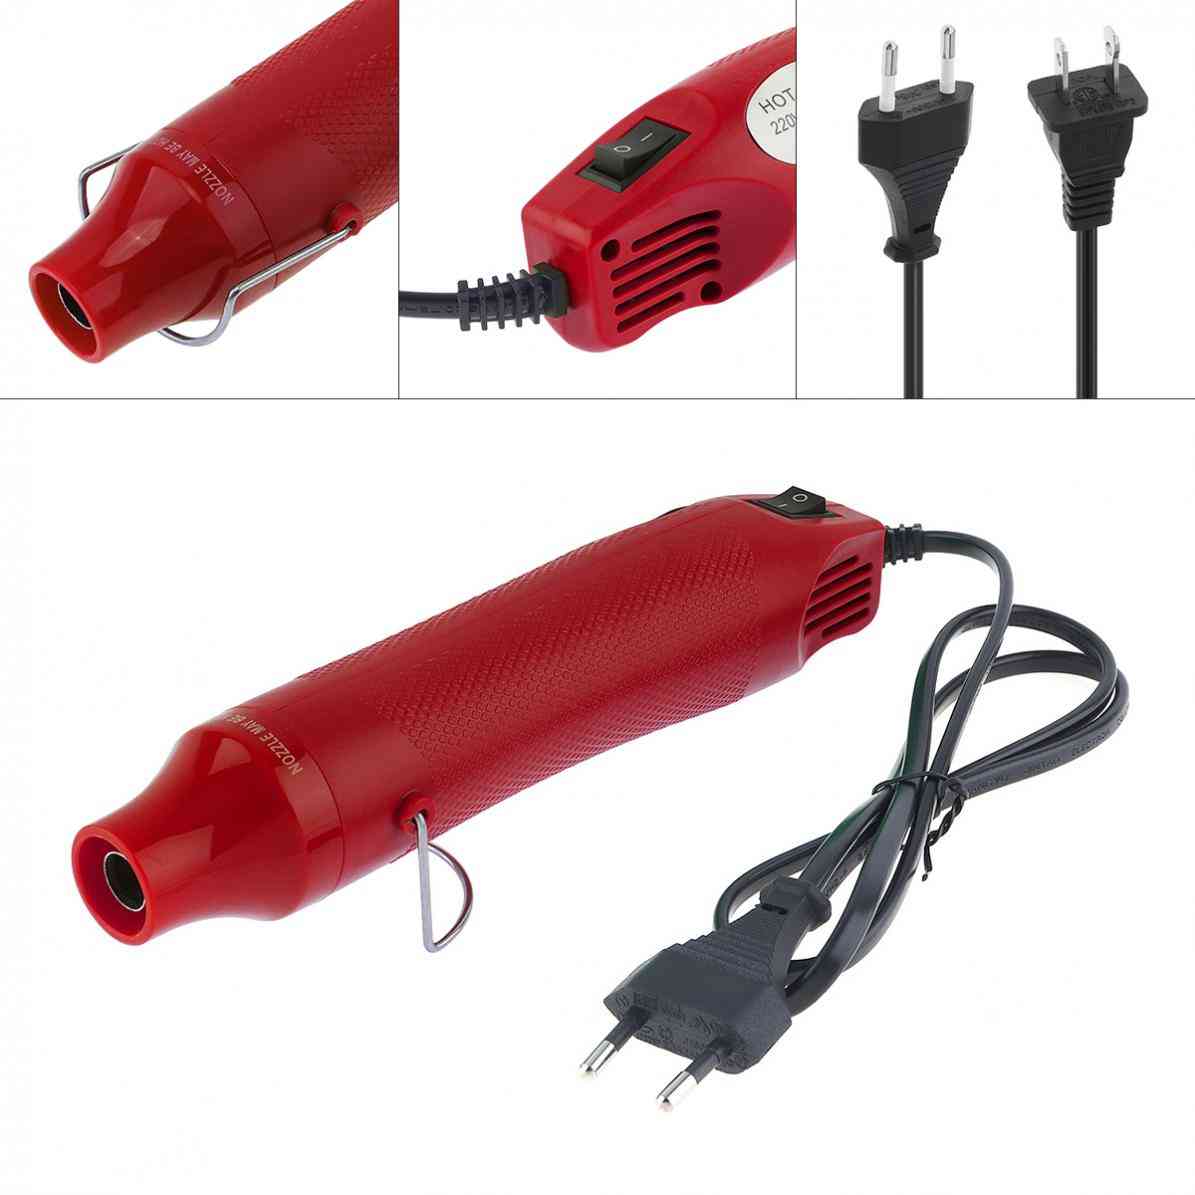 Hot Air- Electric Heat Gun Blower With Shrink Plastic, Heating Accessories